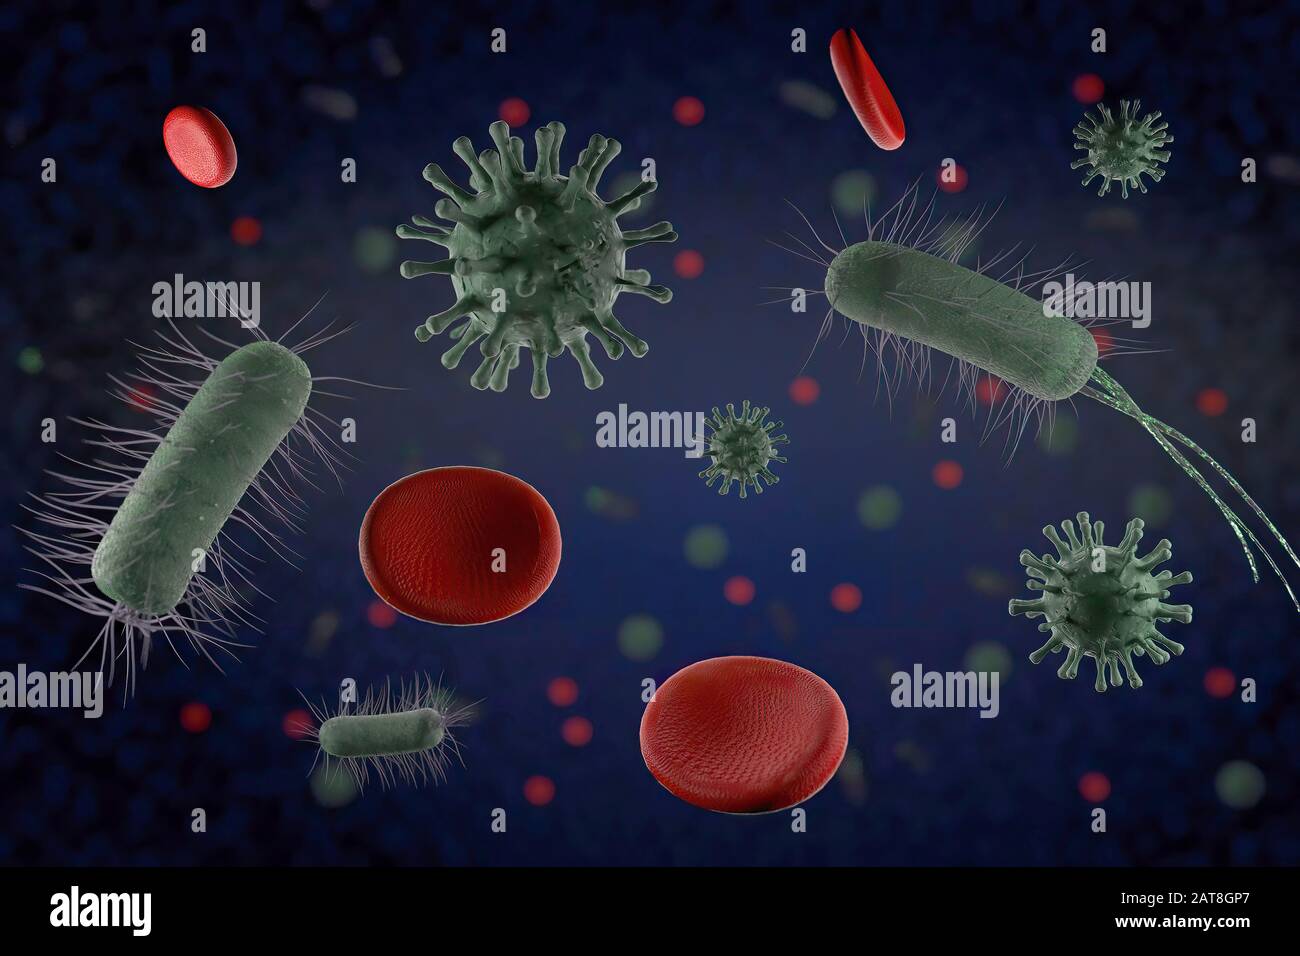 3d illustration, close up of microscopic Virus, Bacteria and Red blood cells Stock Photo